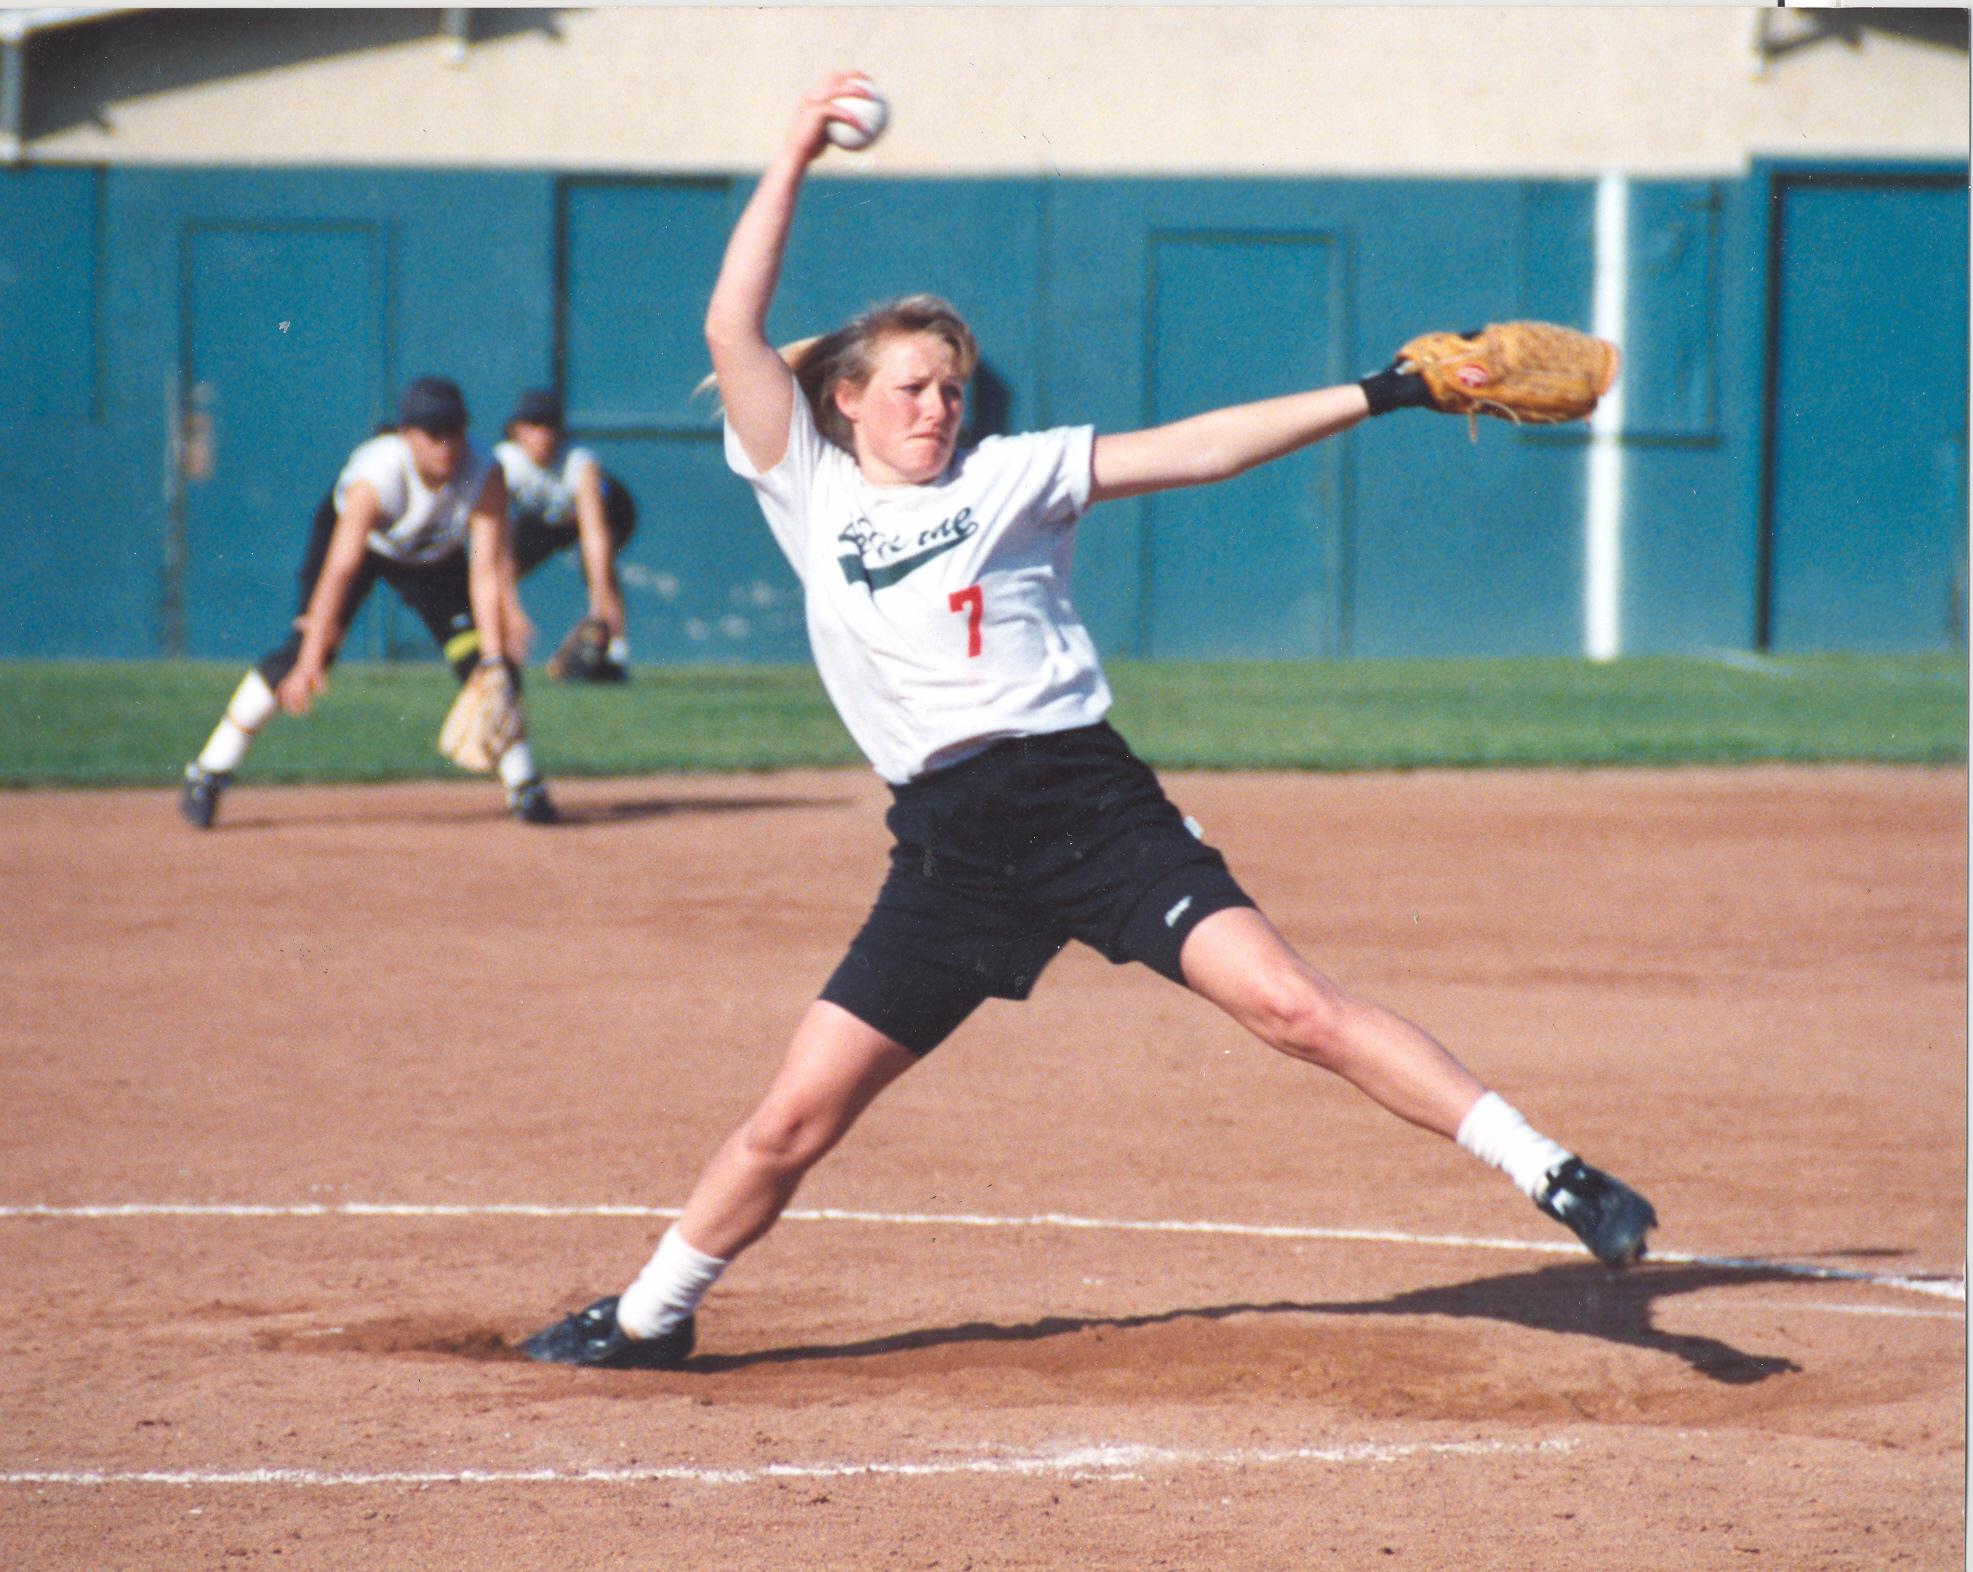 Softball standout Stacey Mays was named Division III Player of the Year in 1993